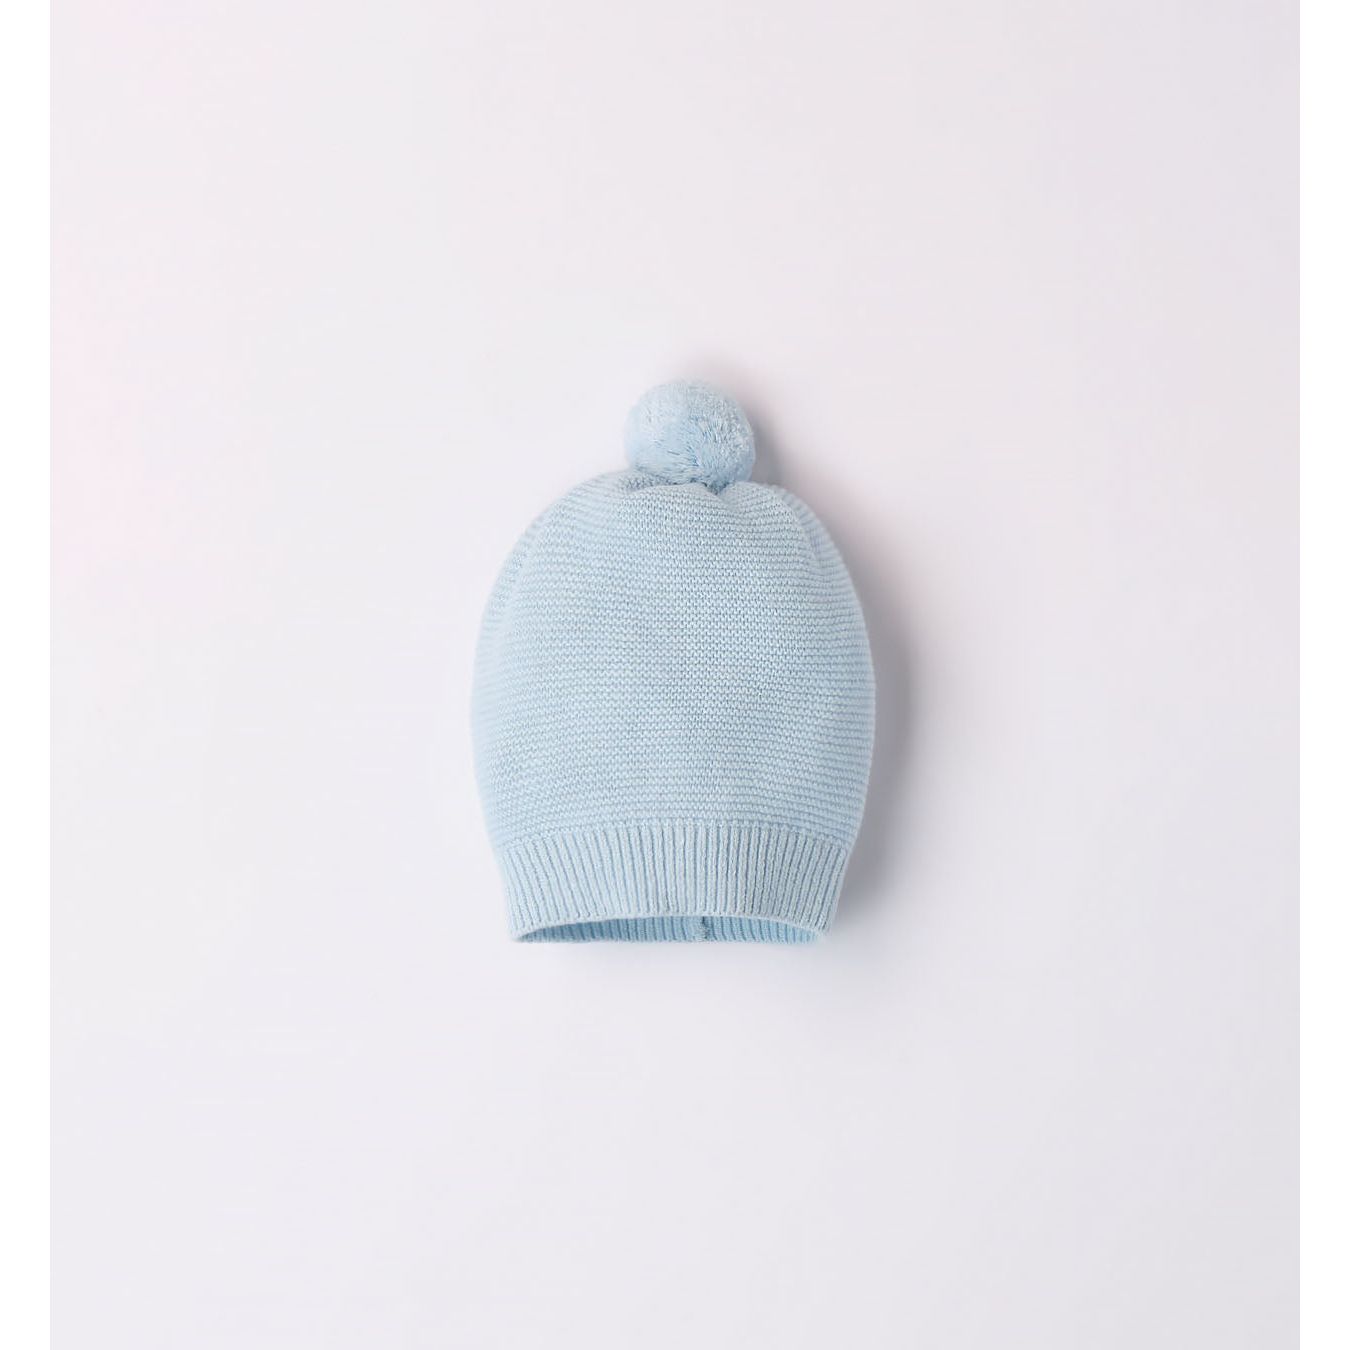 Pale Blue Knitted Hat 3267 - Lala Kids 